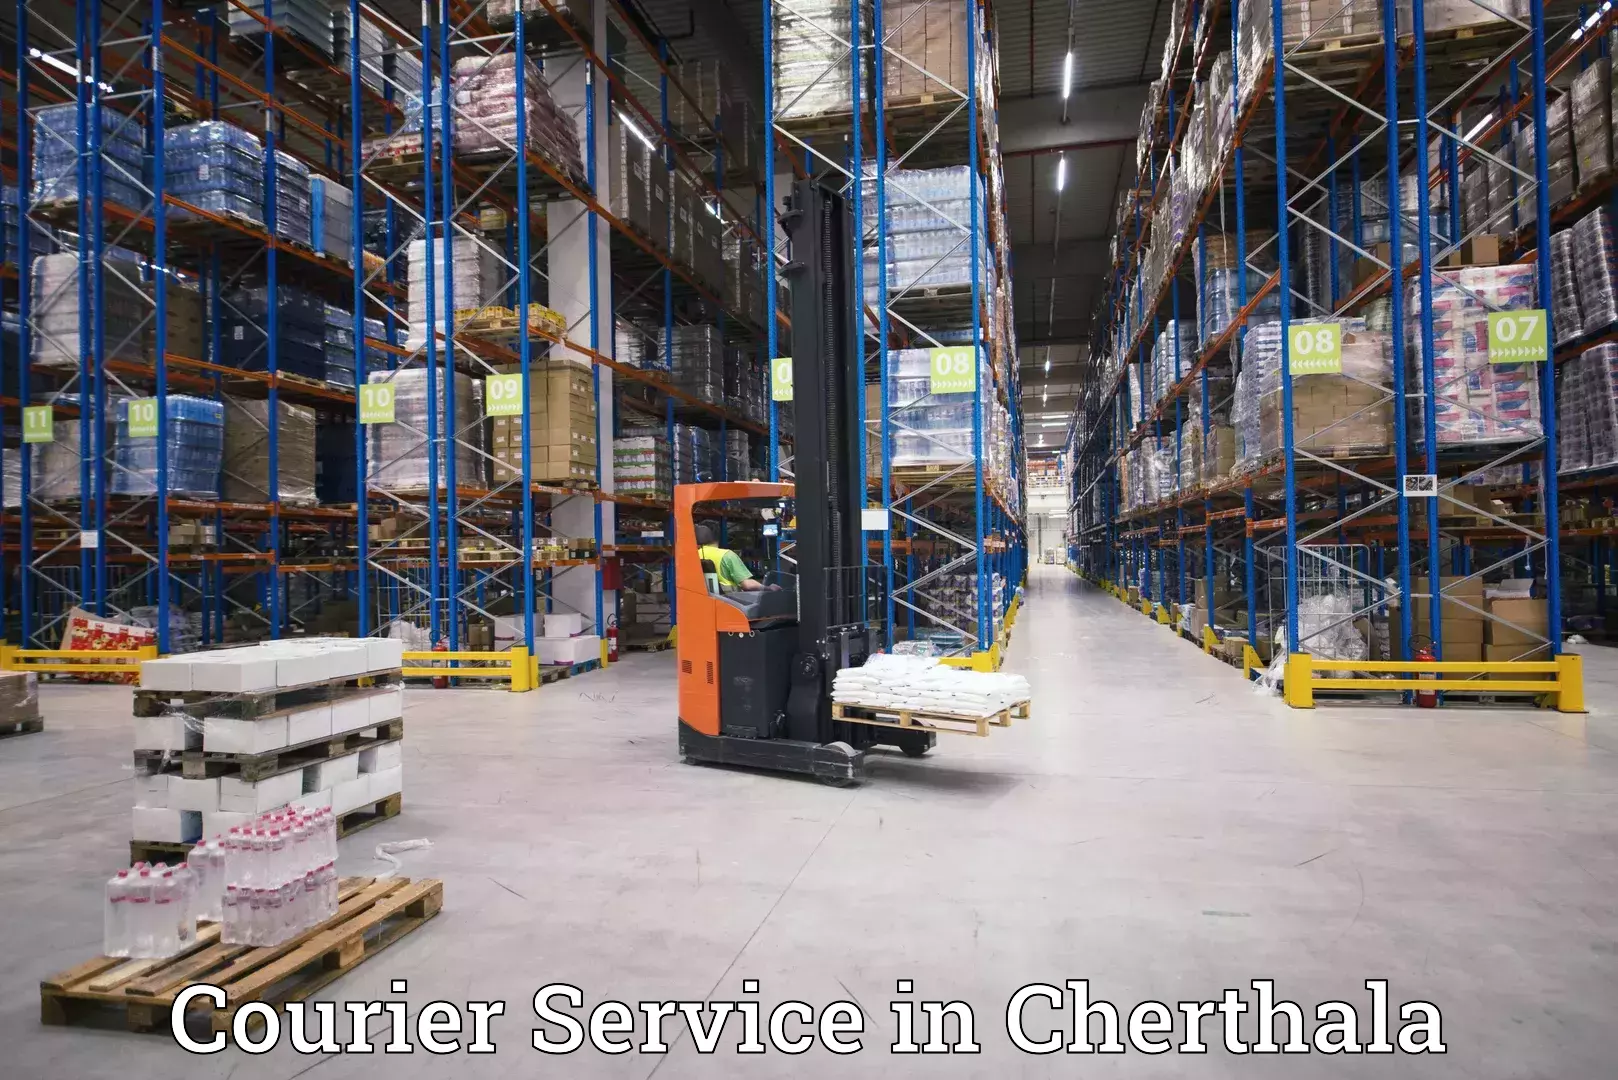 Automated shipping processes in Cherthala